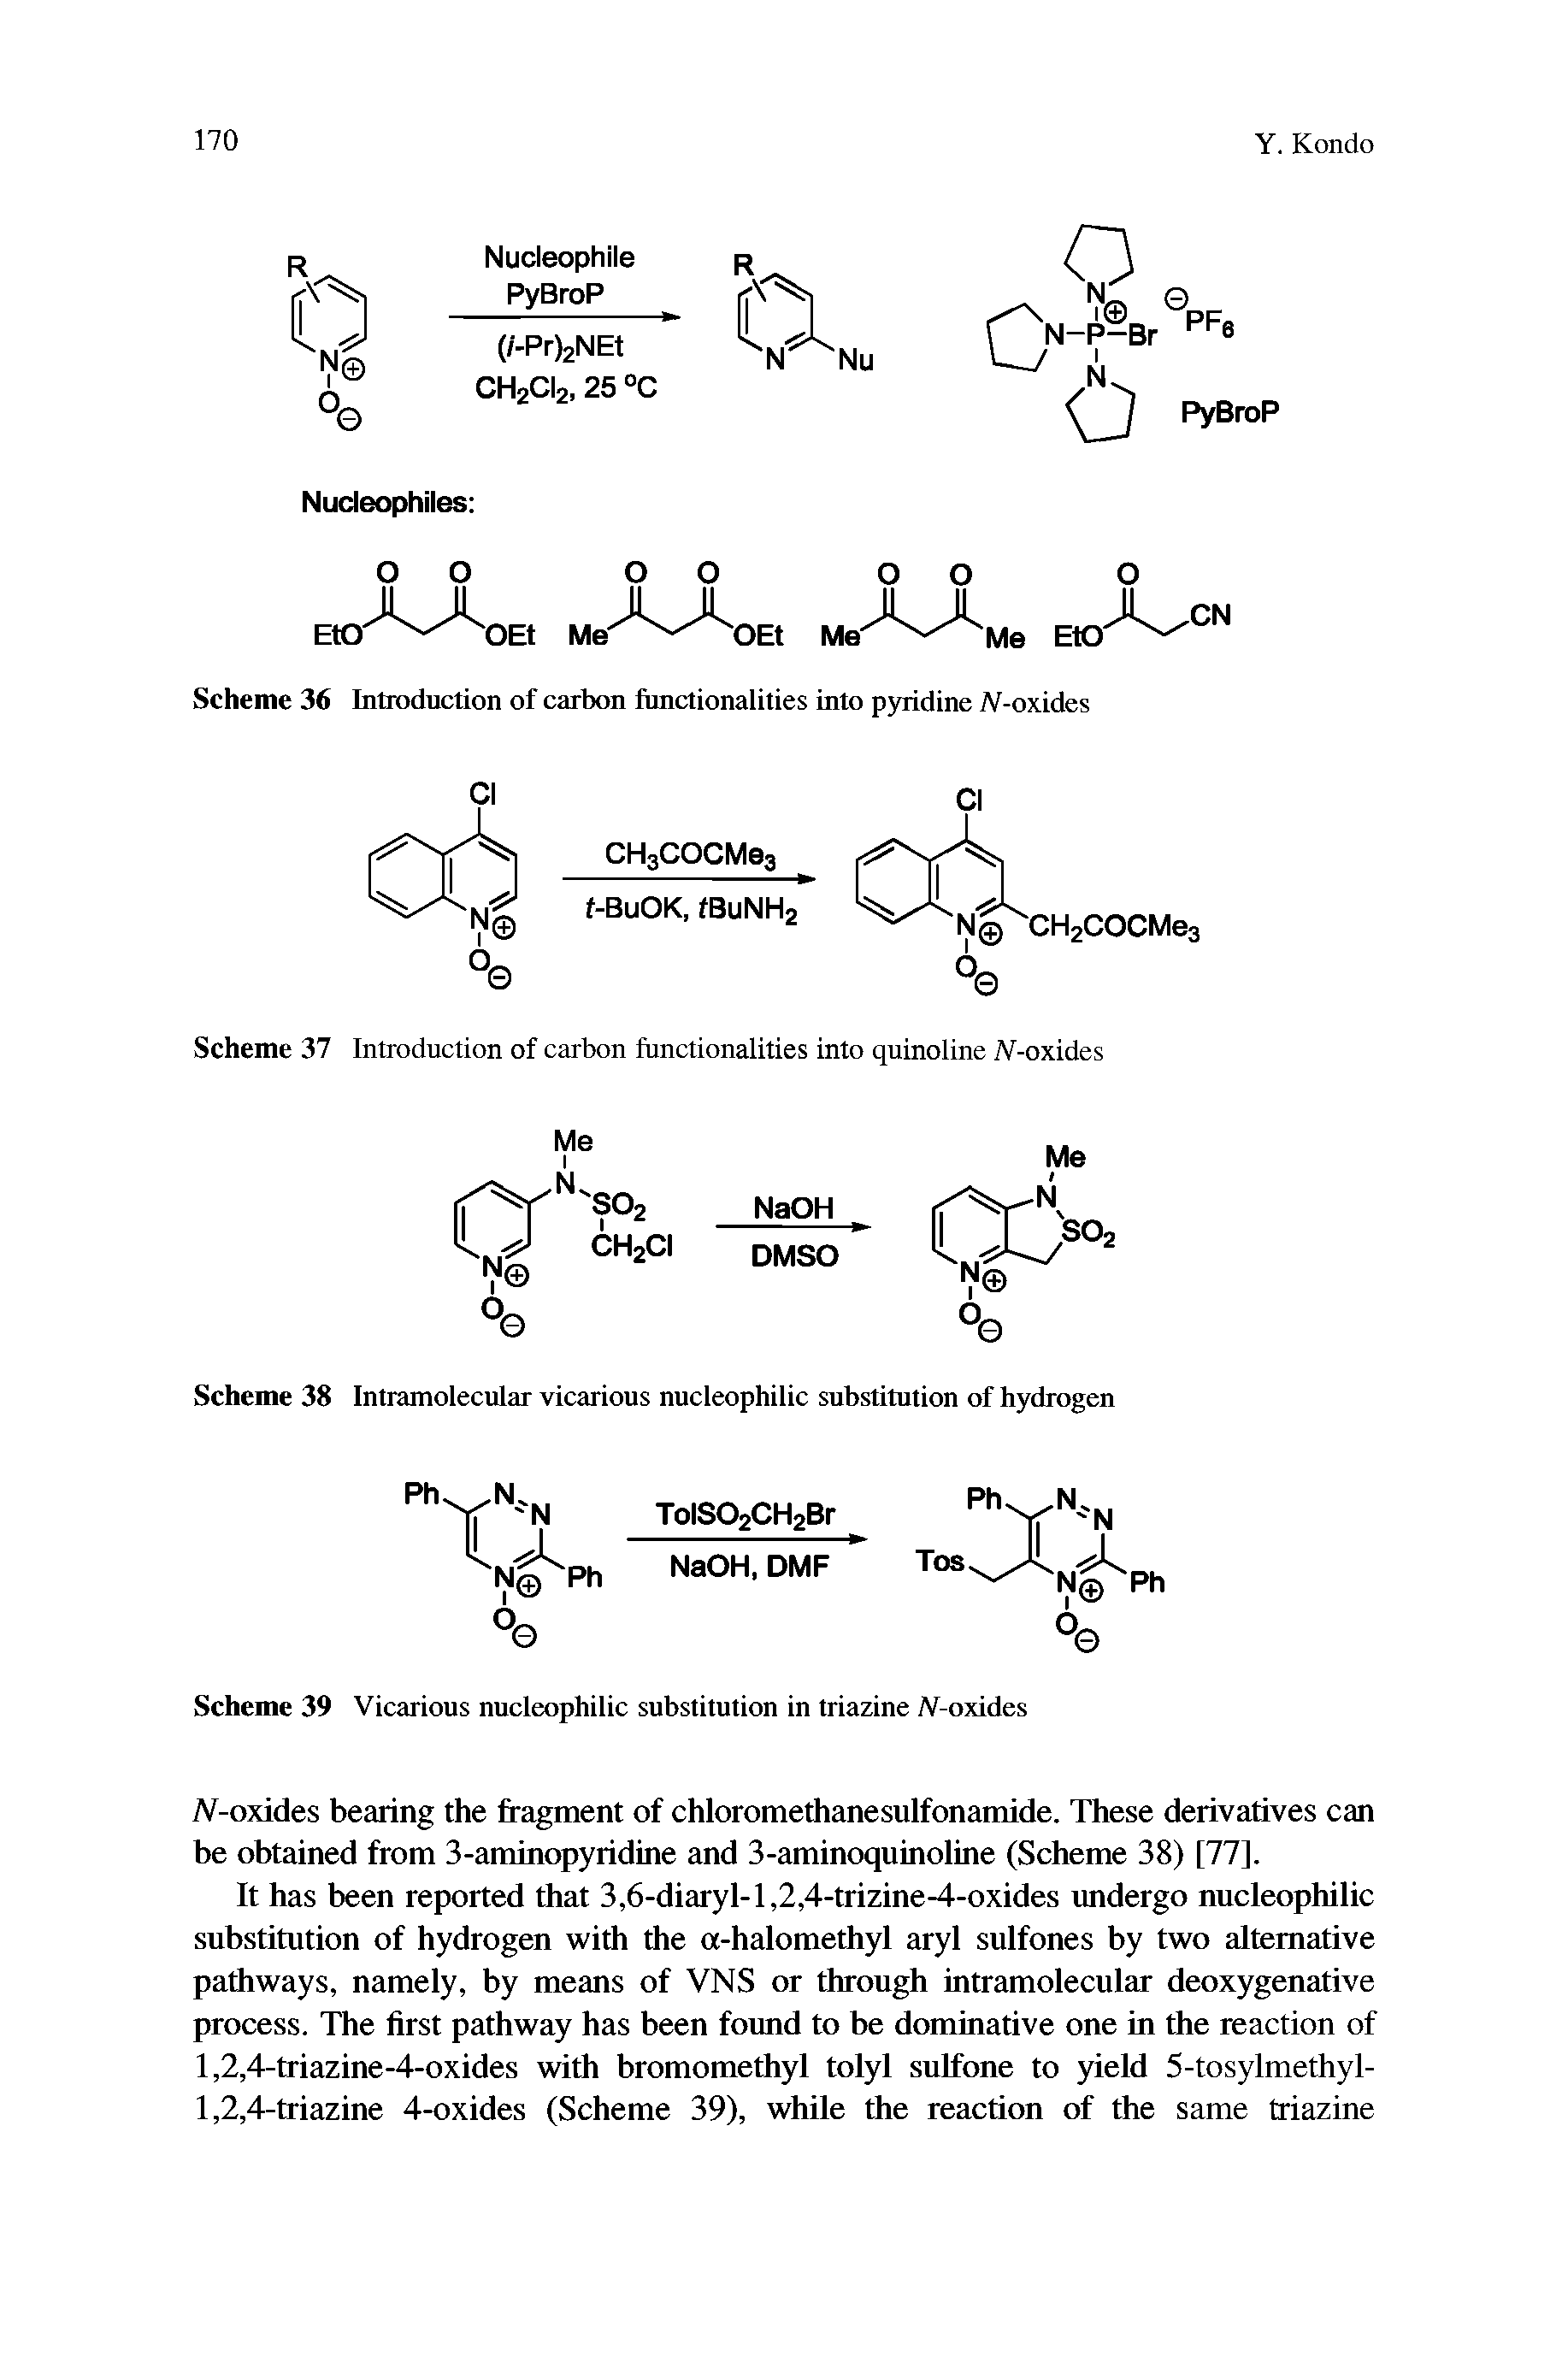 Scheme 39 Vicarious nucleophilic substitution in triazine iV-oxides...